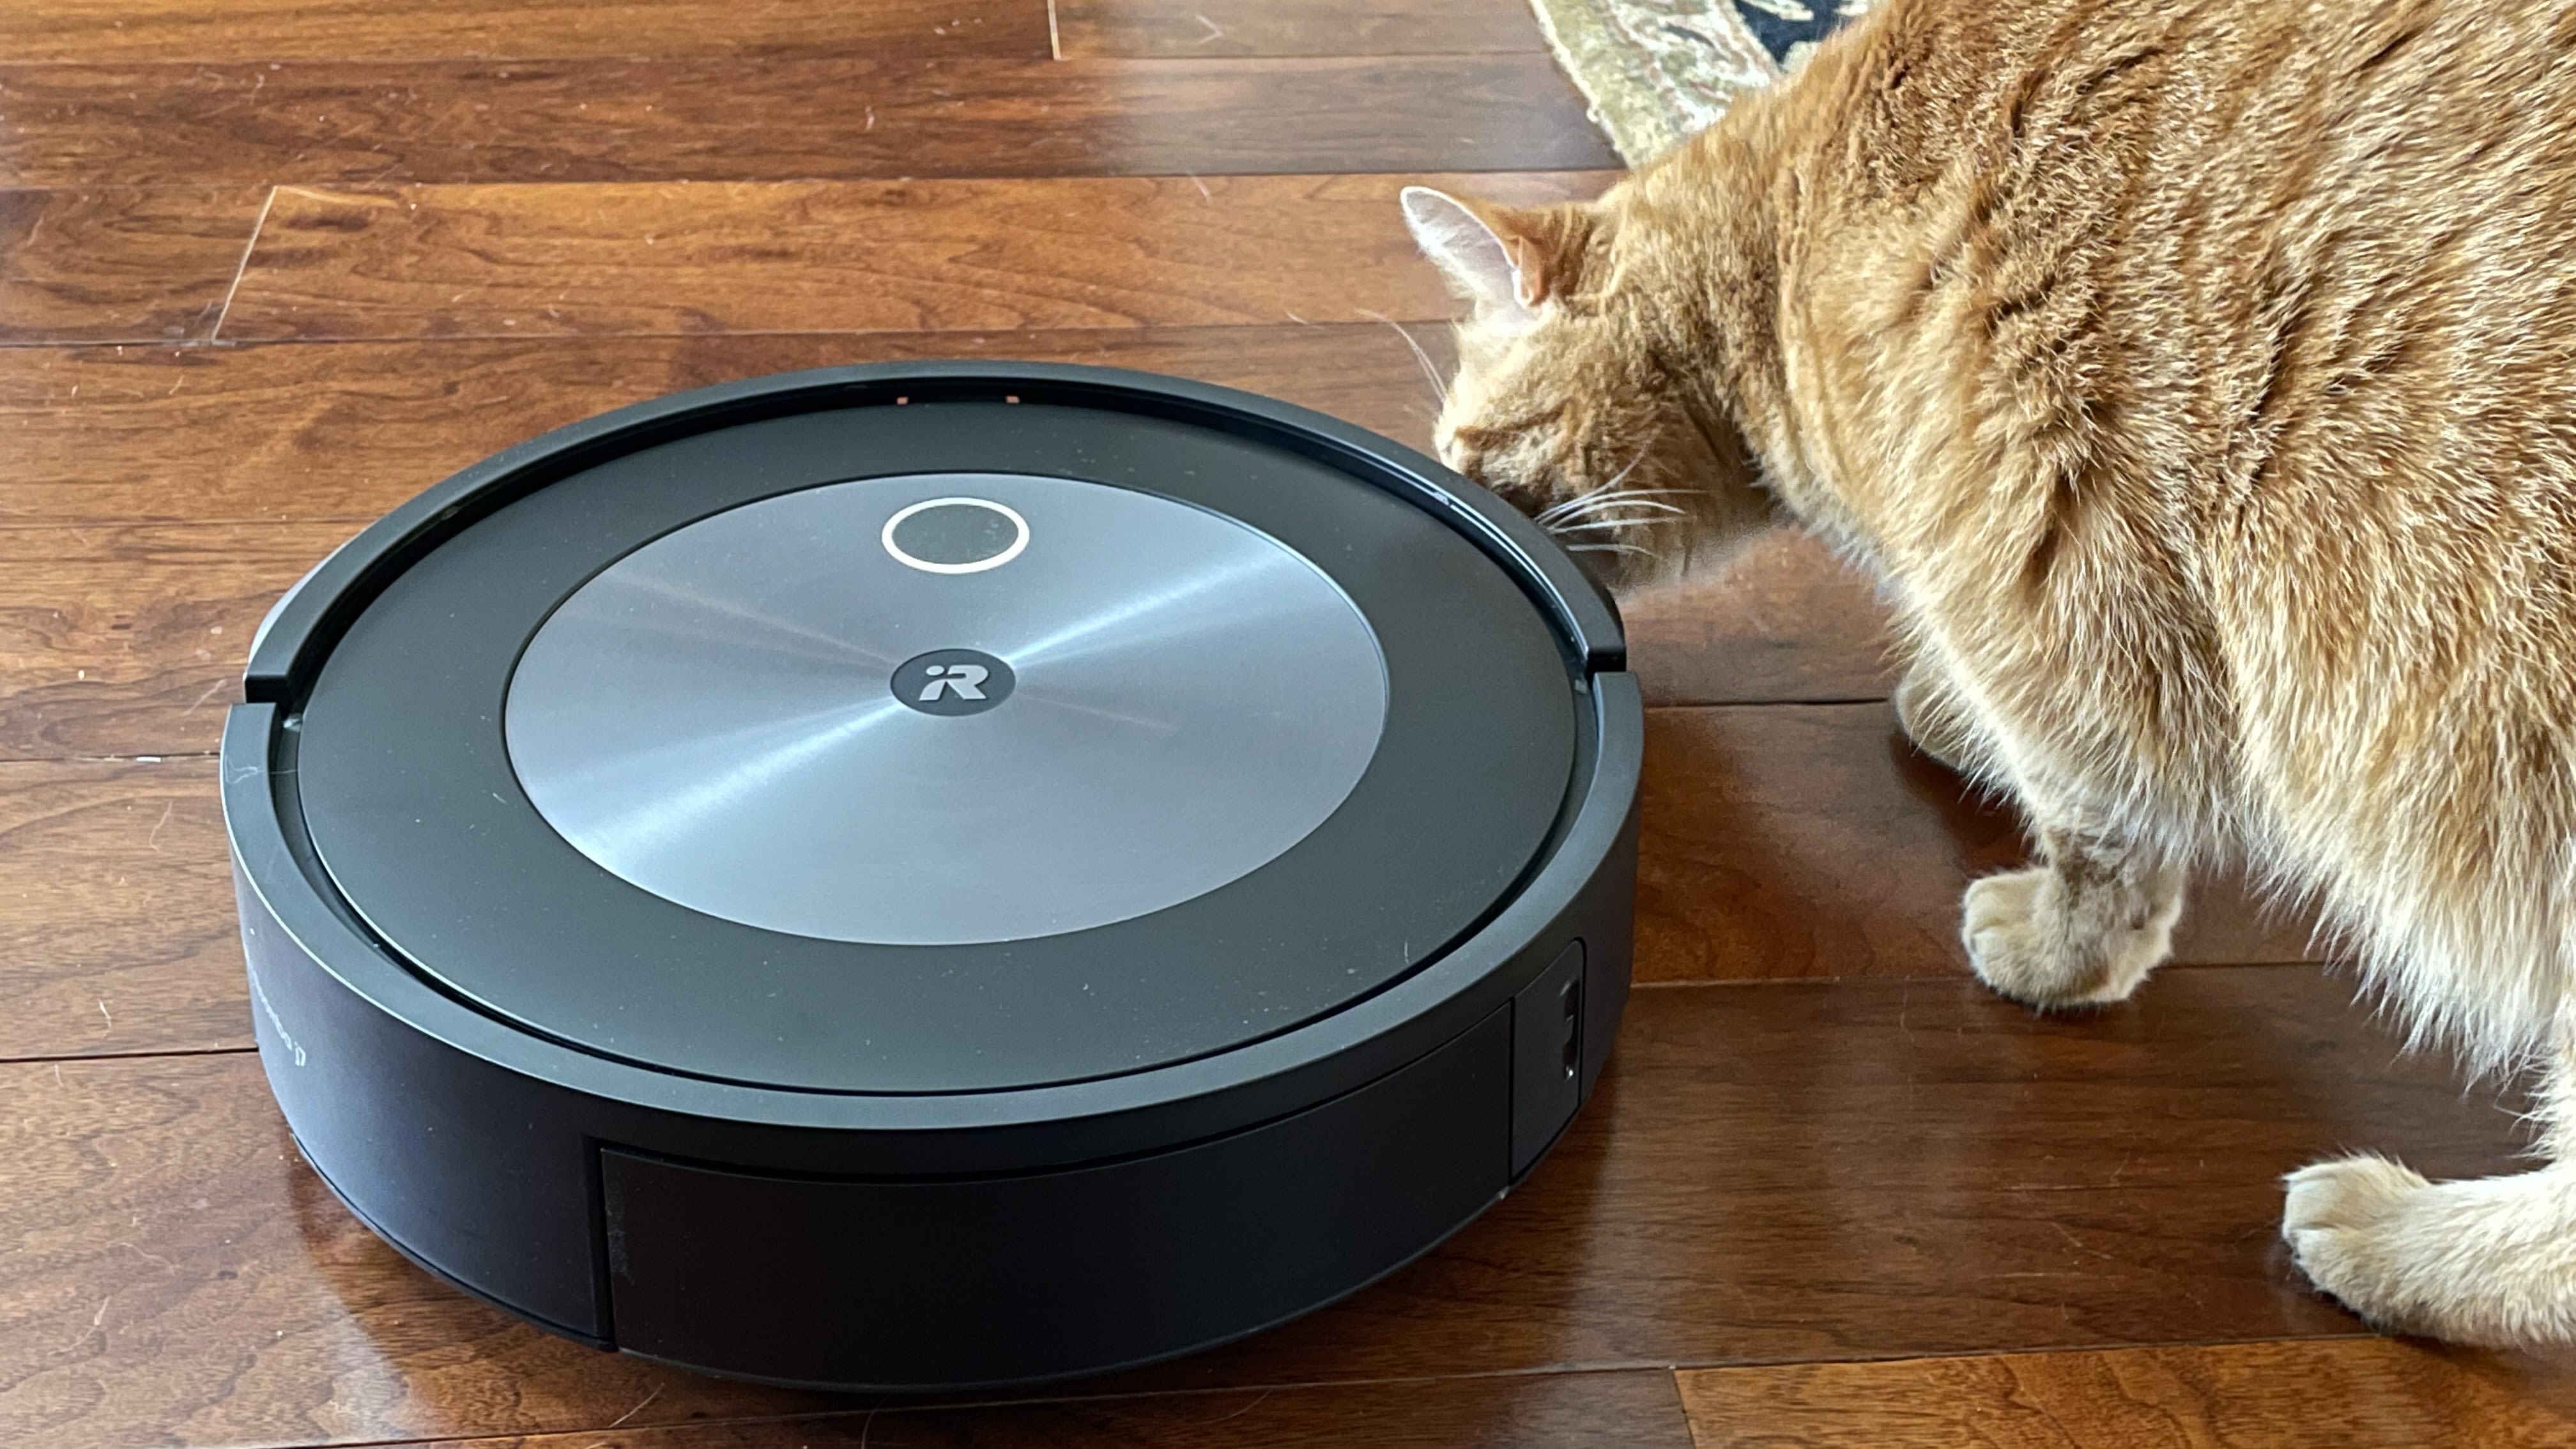 The Best Robot Vacuums Of 2021 Cnn, Are Robot Vacuums Safe For Hardwood Floors